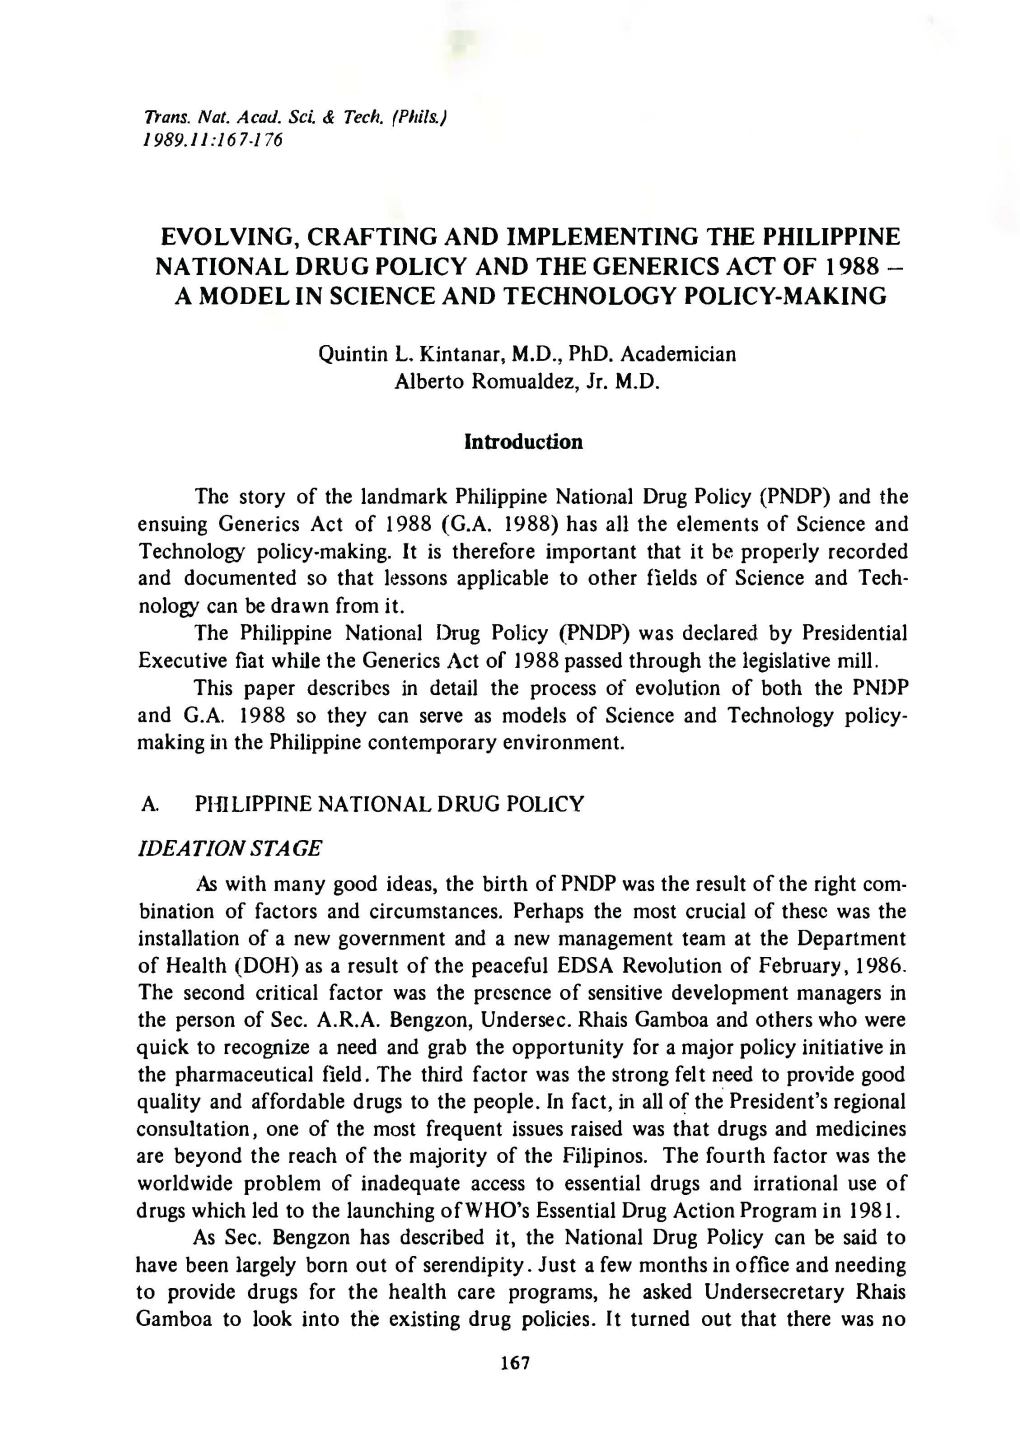 Evolving, Crafting and Implementing the Philippine National Drug Policy and the Generics Act of 1988 - a Model in Science and Technology Policy-Making